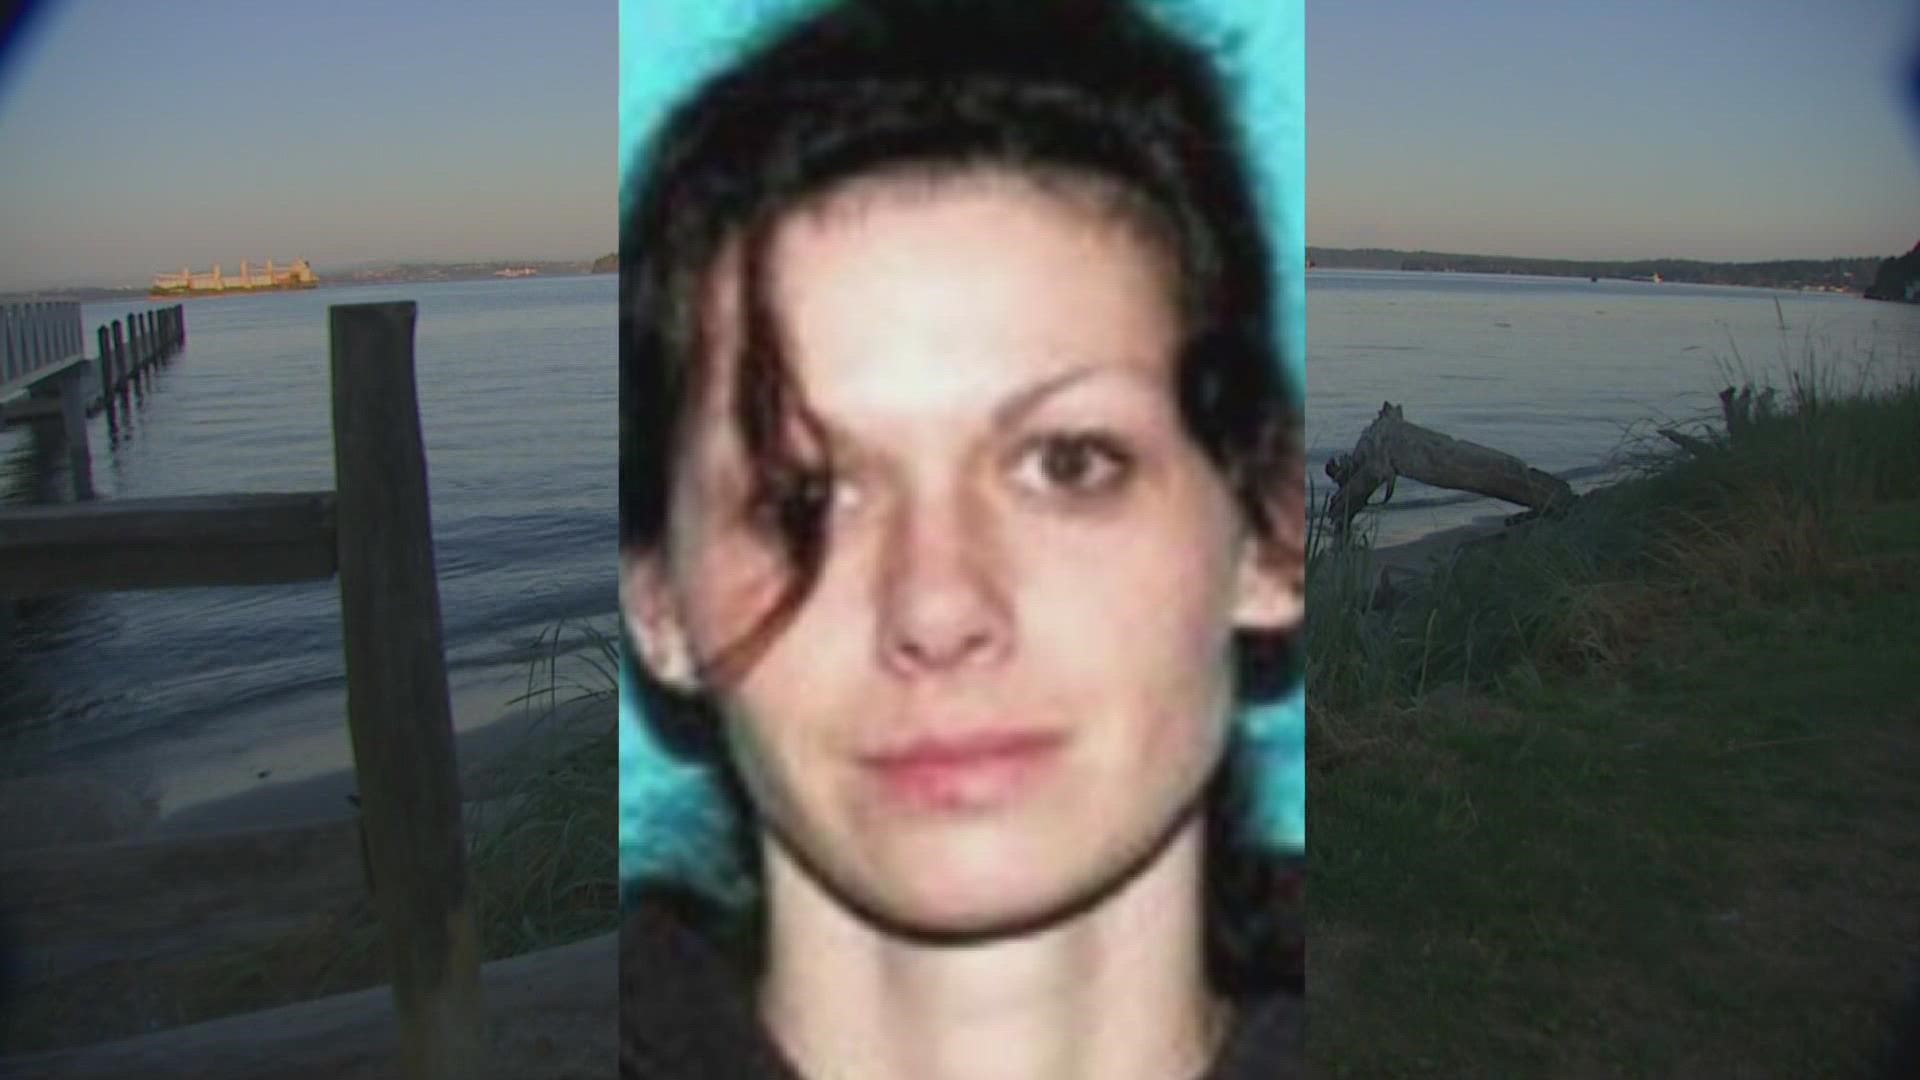 Shanan Lynn Read's decomposed body was found floating in a plastic container in Puget Sound on Jan. 15, 2006.